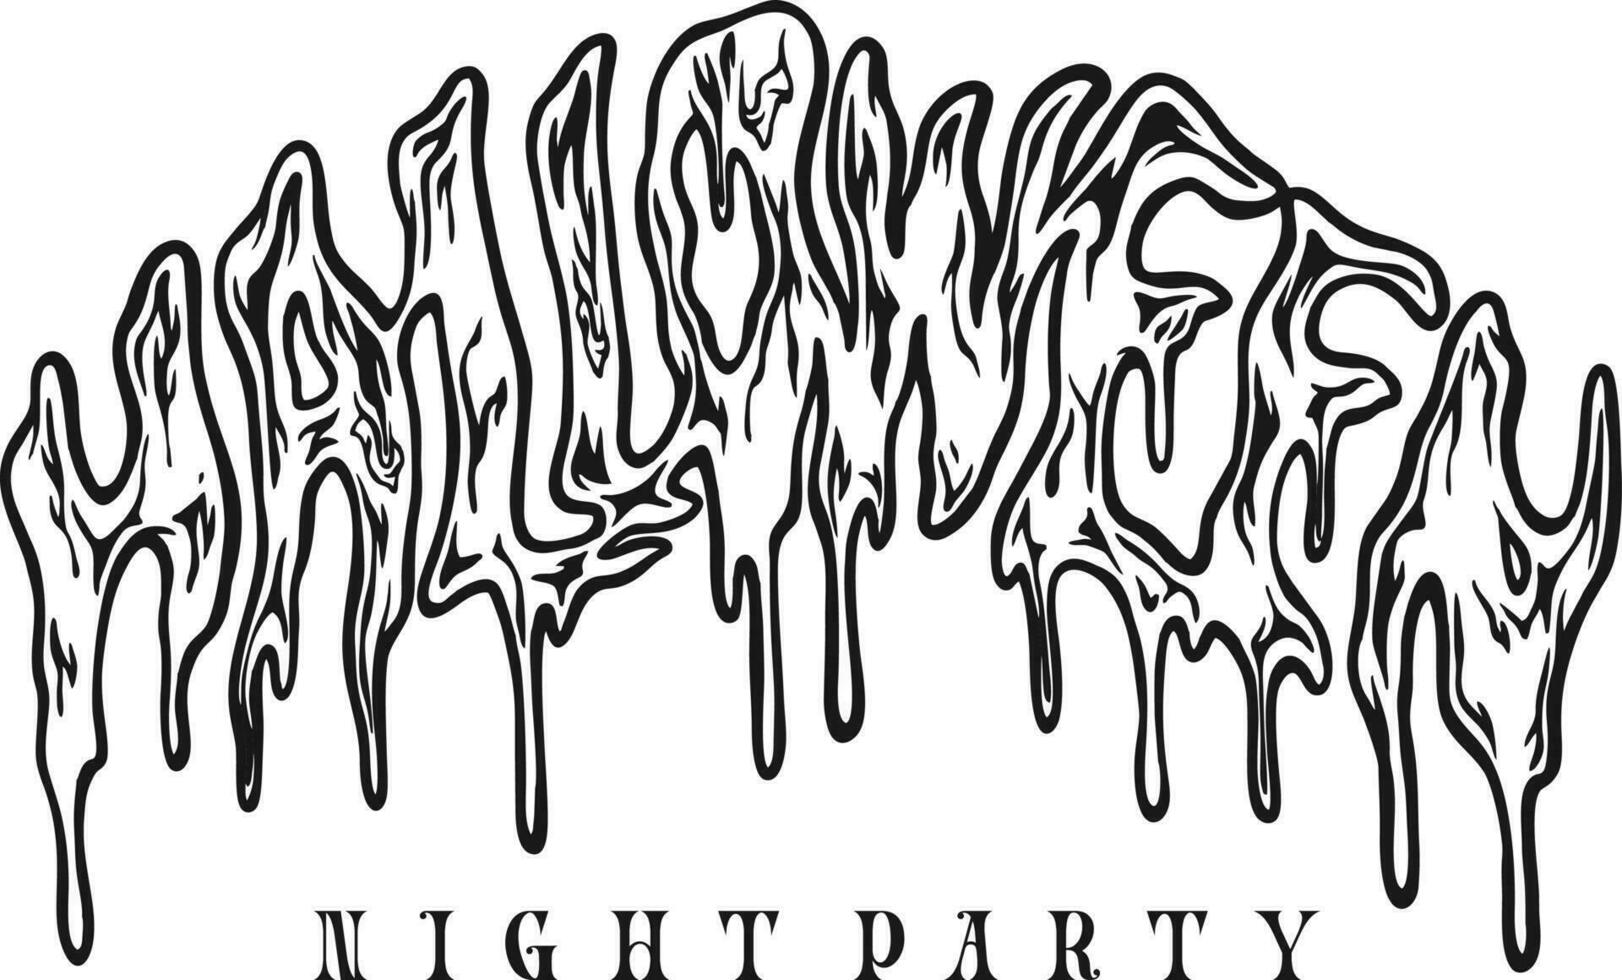 Dripping horror halloween word lettering typography illustrations monochrome  vector illustrations for your work logo, merchandise t-shirt, stickers and label designs, poster, greeting cards